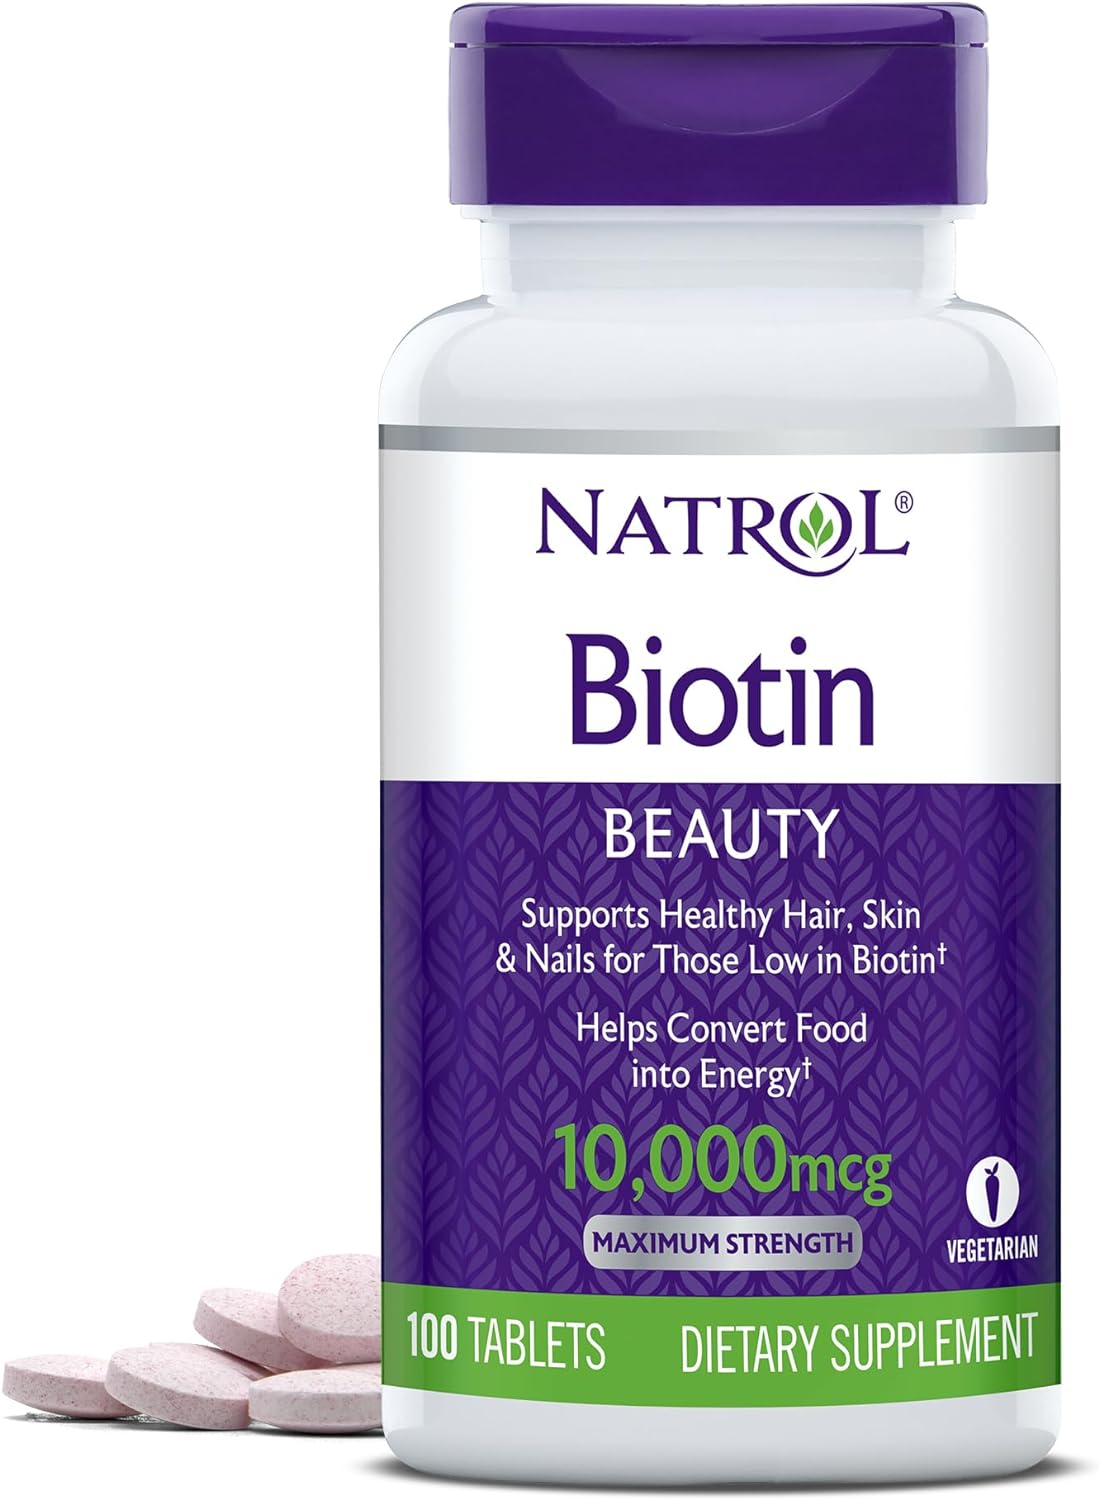 Natrol Biotin Beauty Tablets, Promotes Healthy Hair, Skin and Nails, Helps Support Energy Metabolism, Helps Convert Food Into Energy, Maximum Strength, 10,000mcg, 100 Count (Pack of 1)